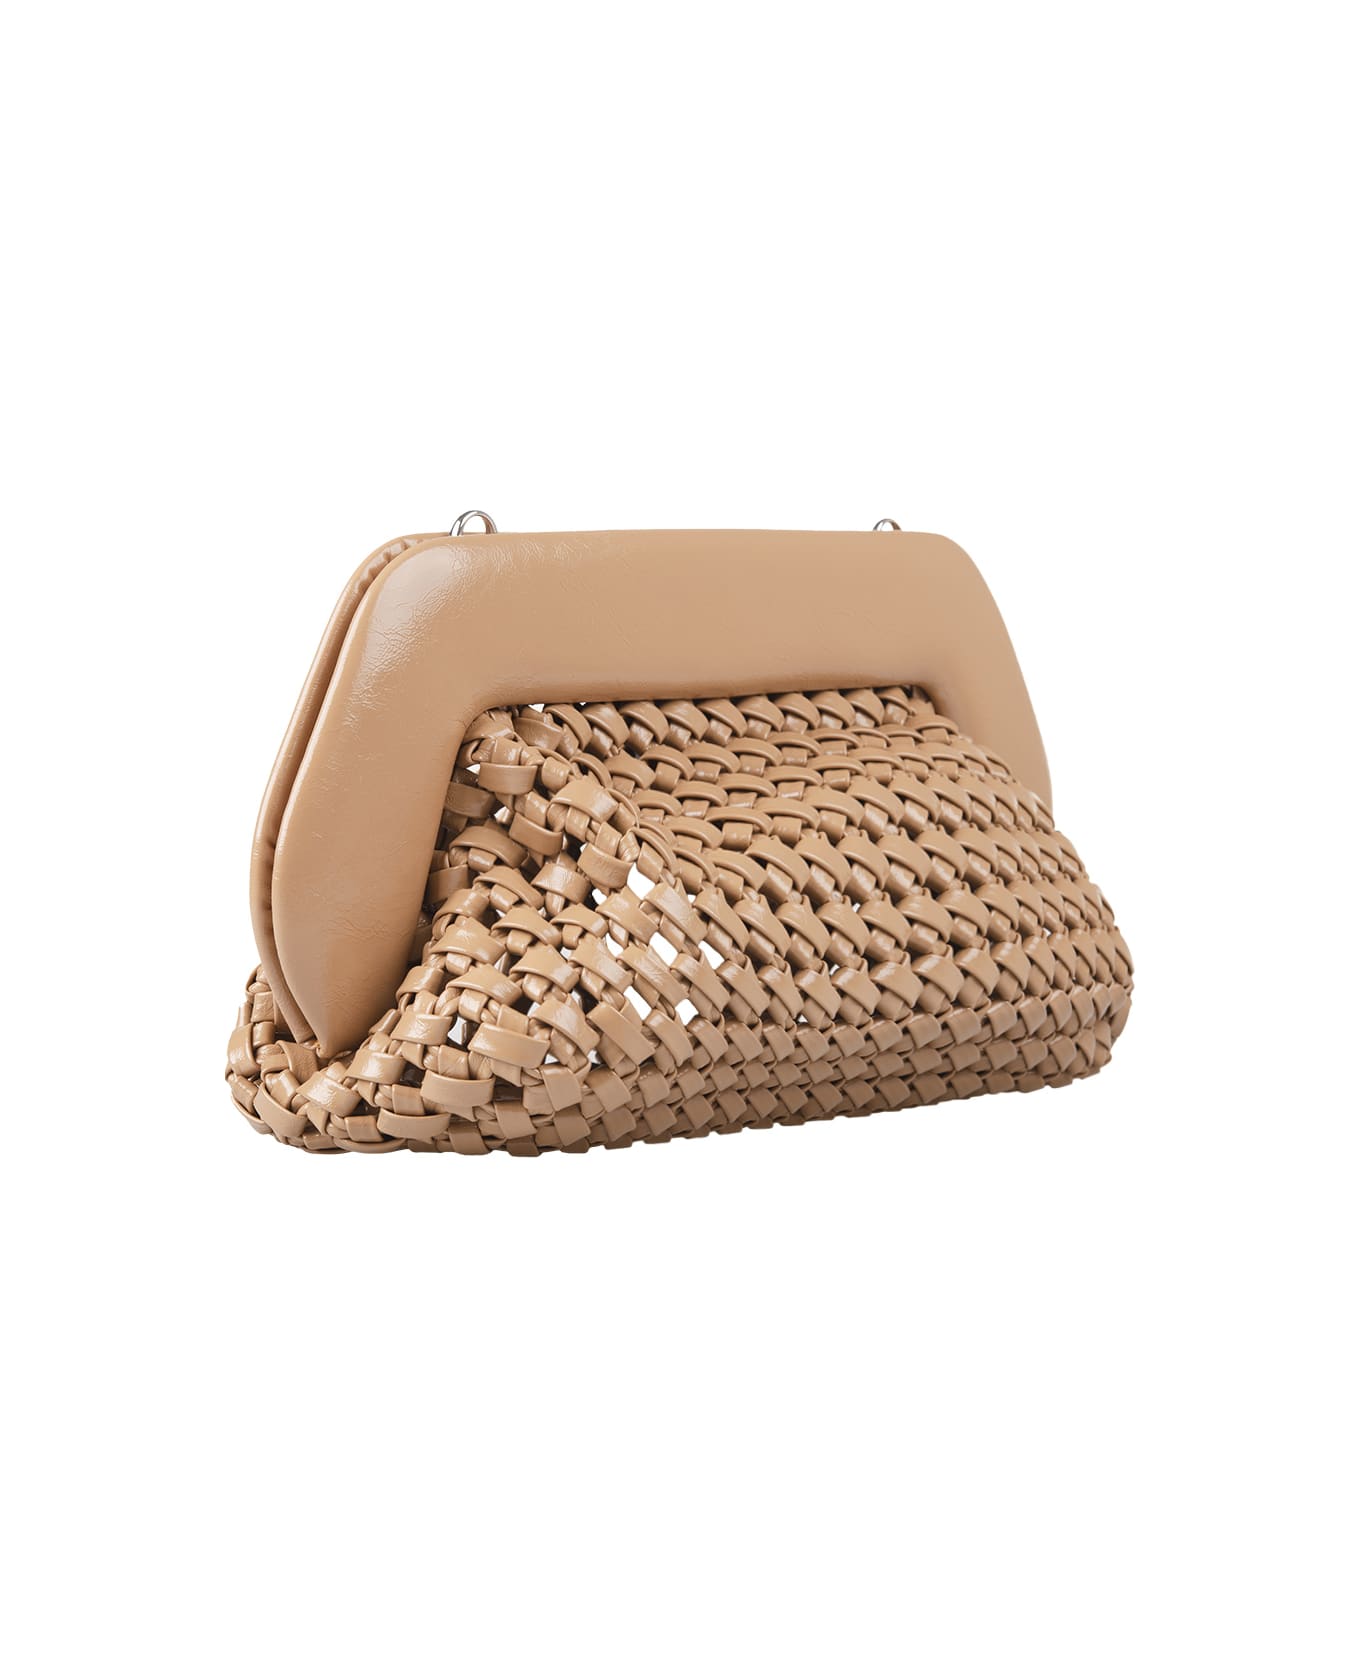 THEMOIRè Clay Bios Knots Shiny Clutch Bag - Brown クラッチバッグ